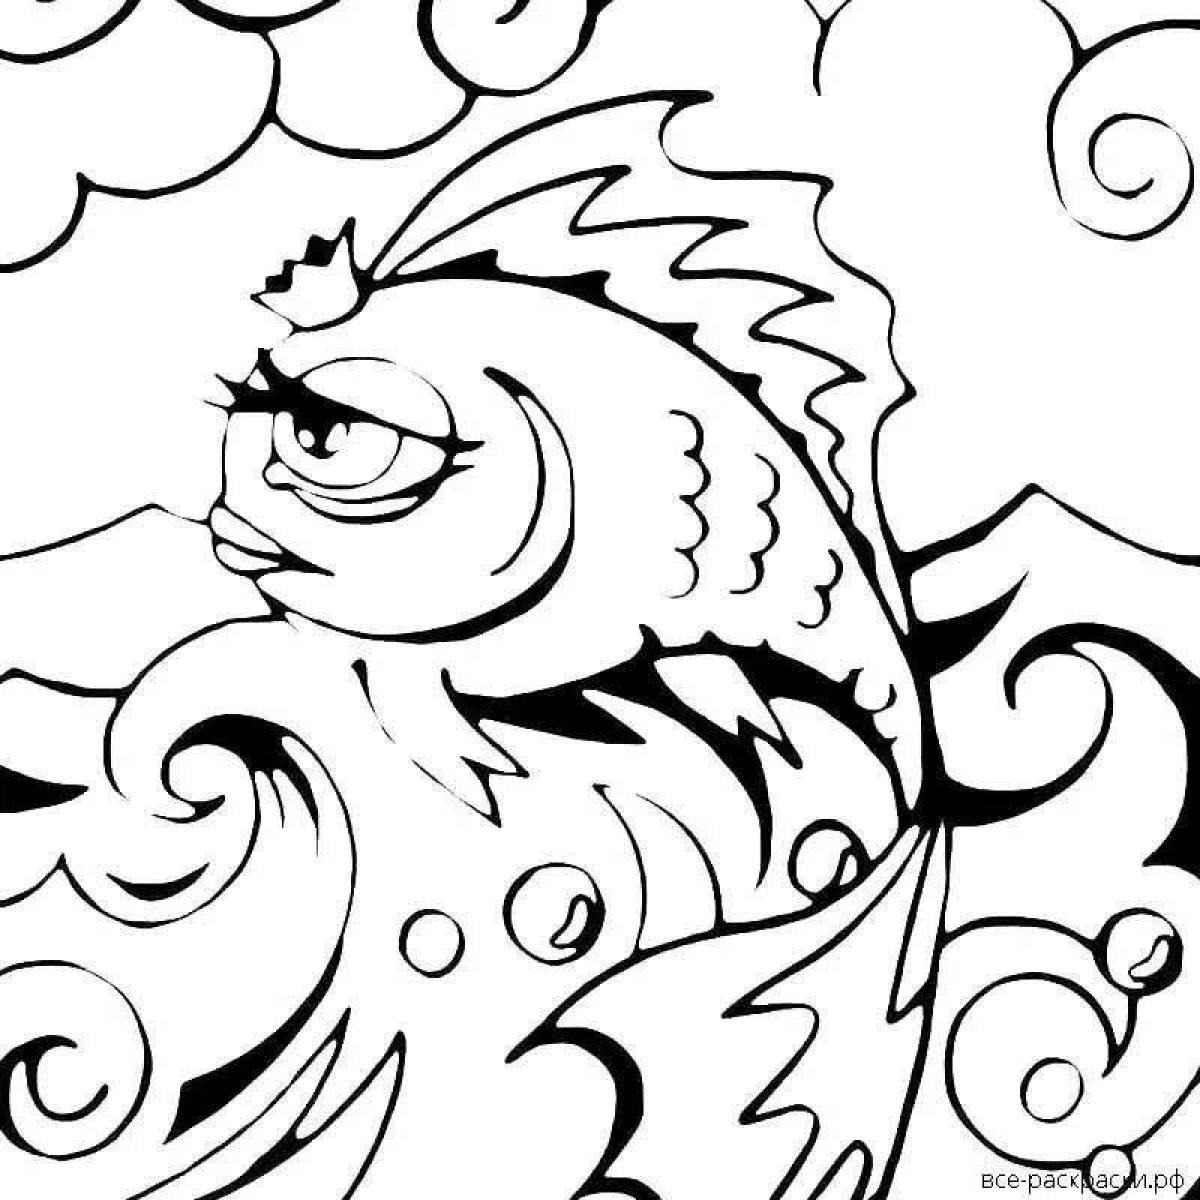 Coloring book based on Pushkin's fairy tales for preschoolers